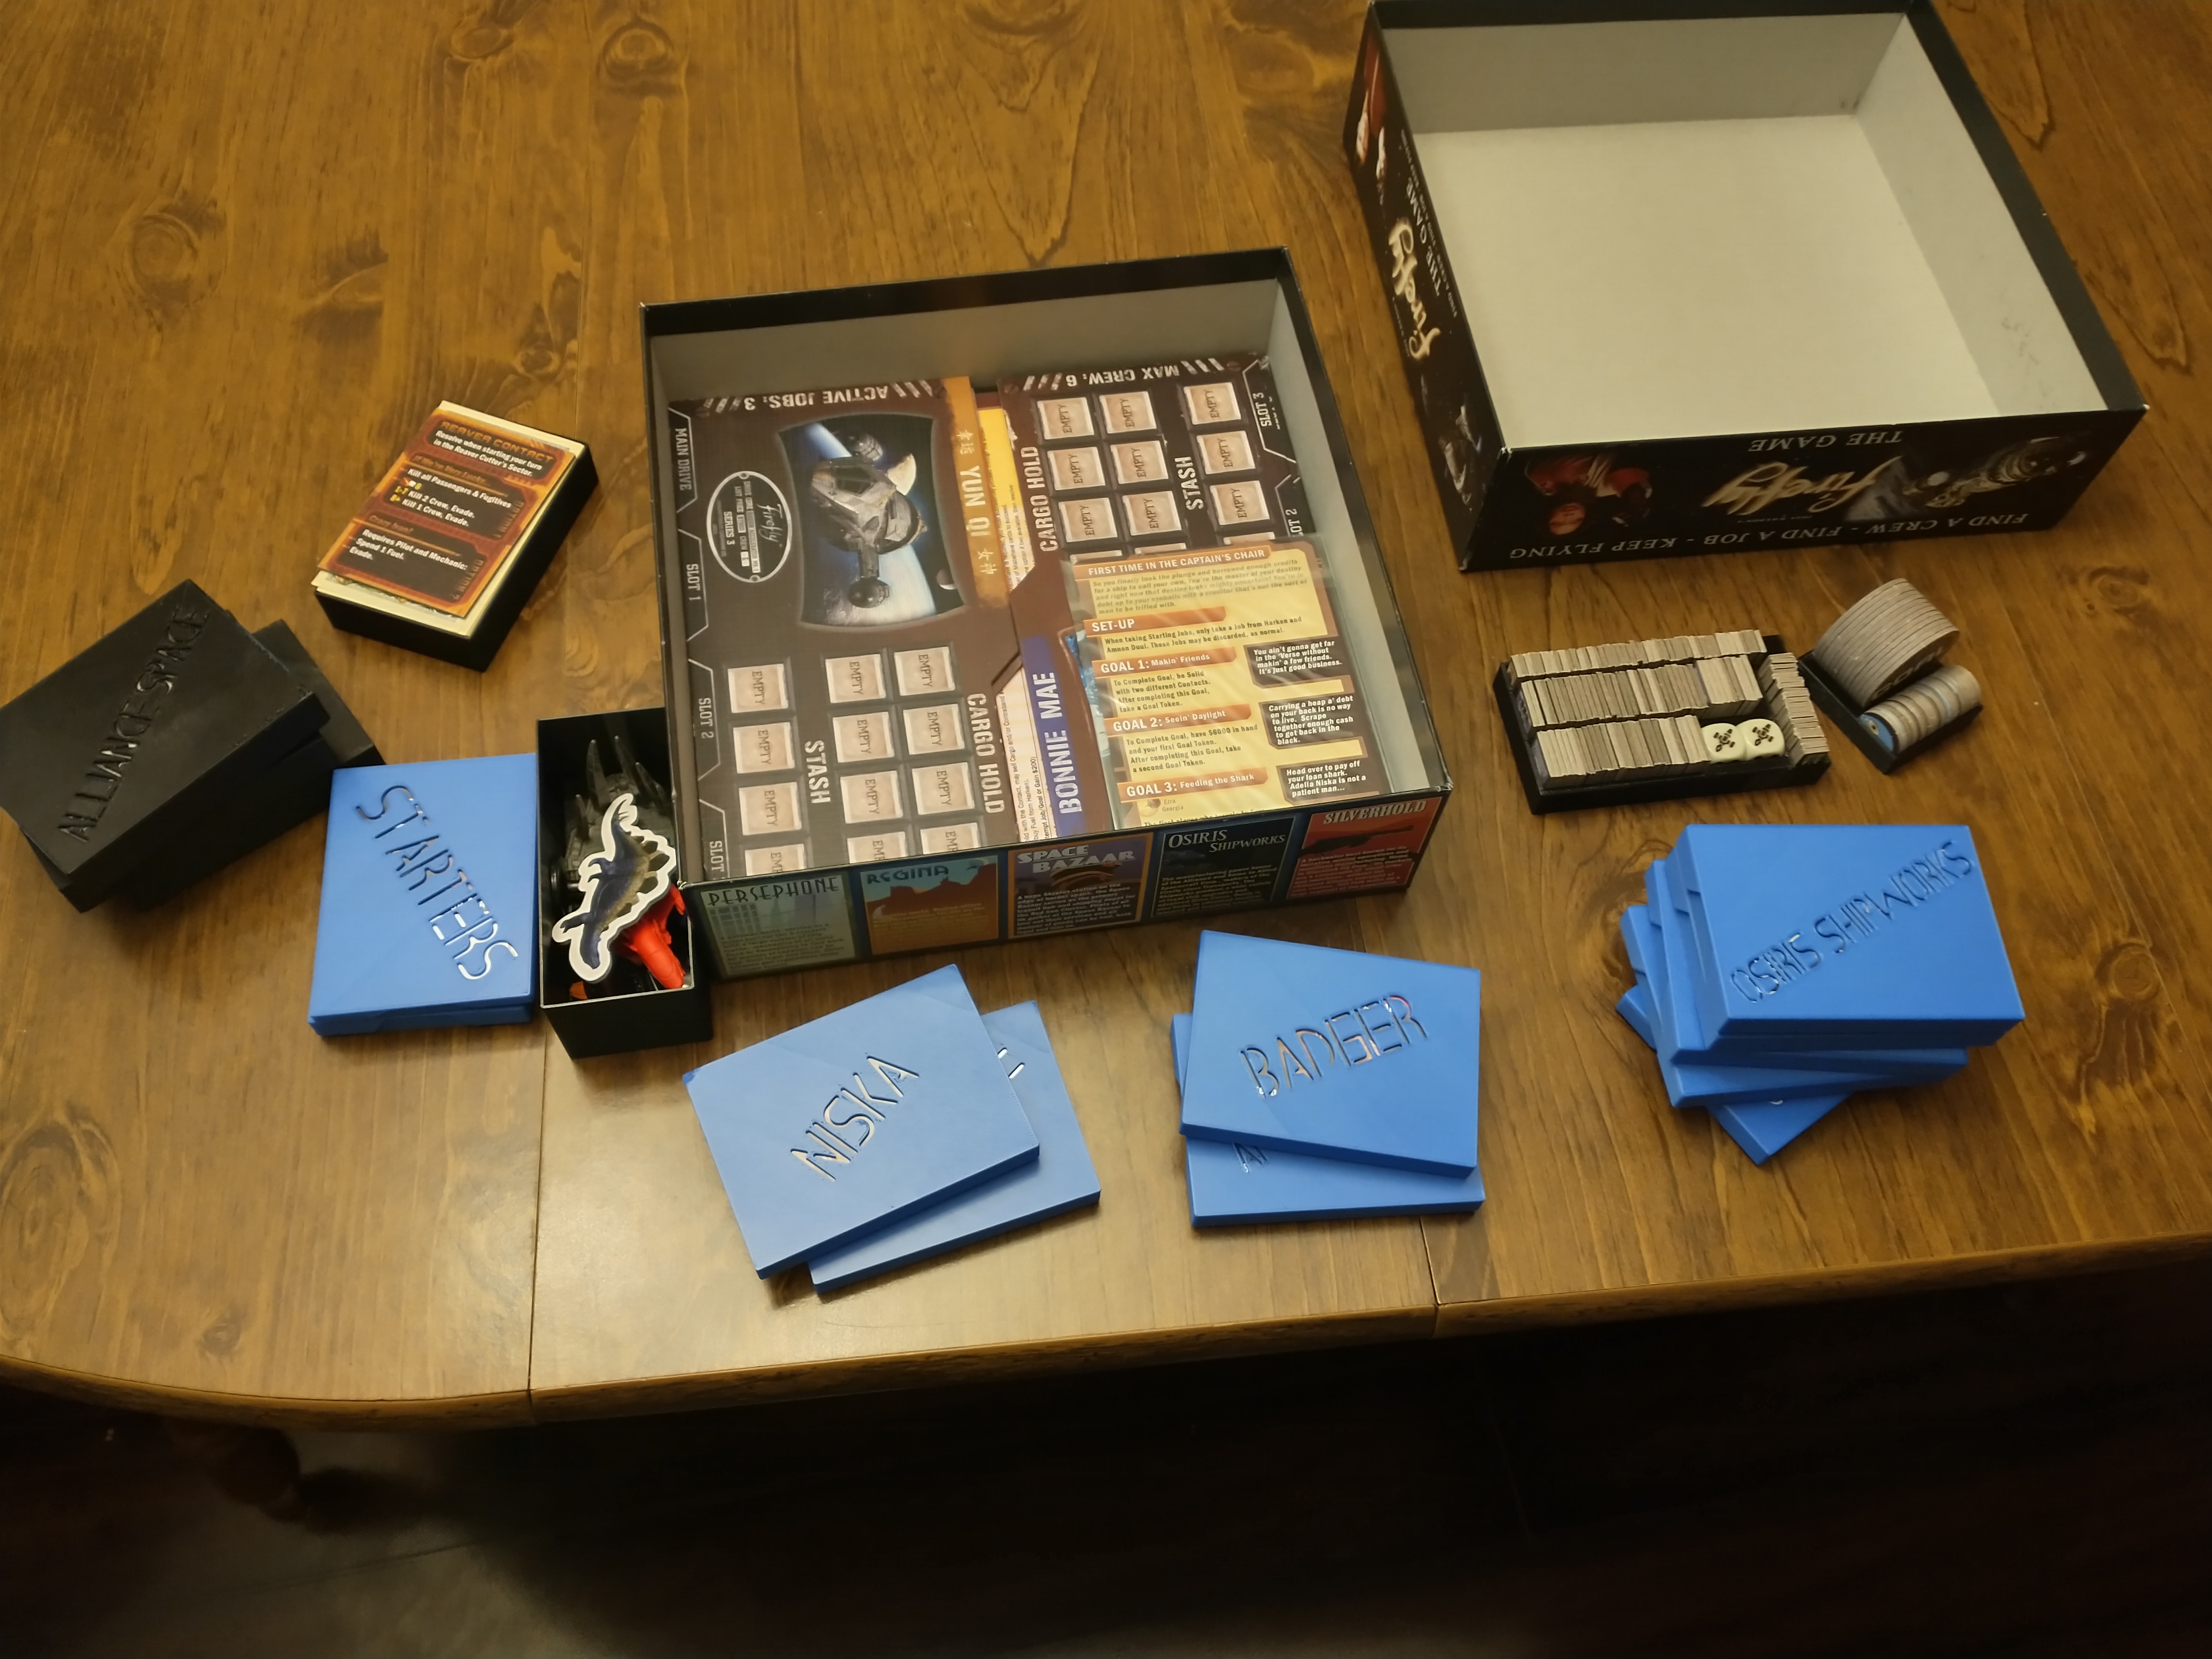 Firefly: The Board Game Base Edition insert